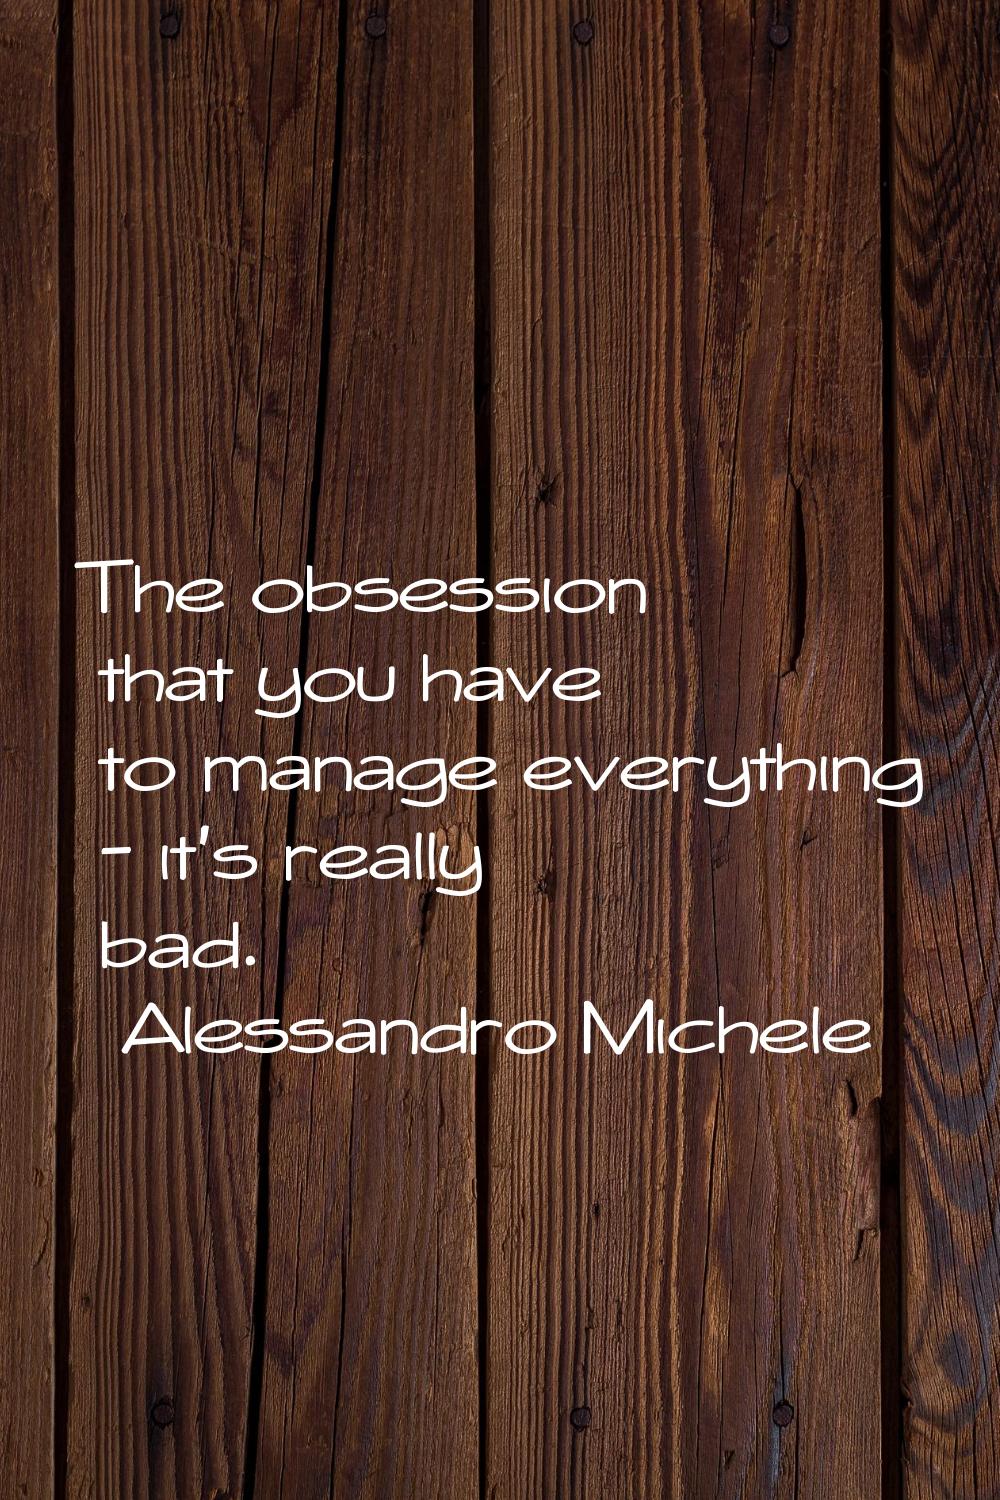 The obsession that you have to manage everything - it's really bad.